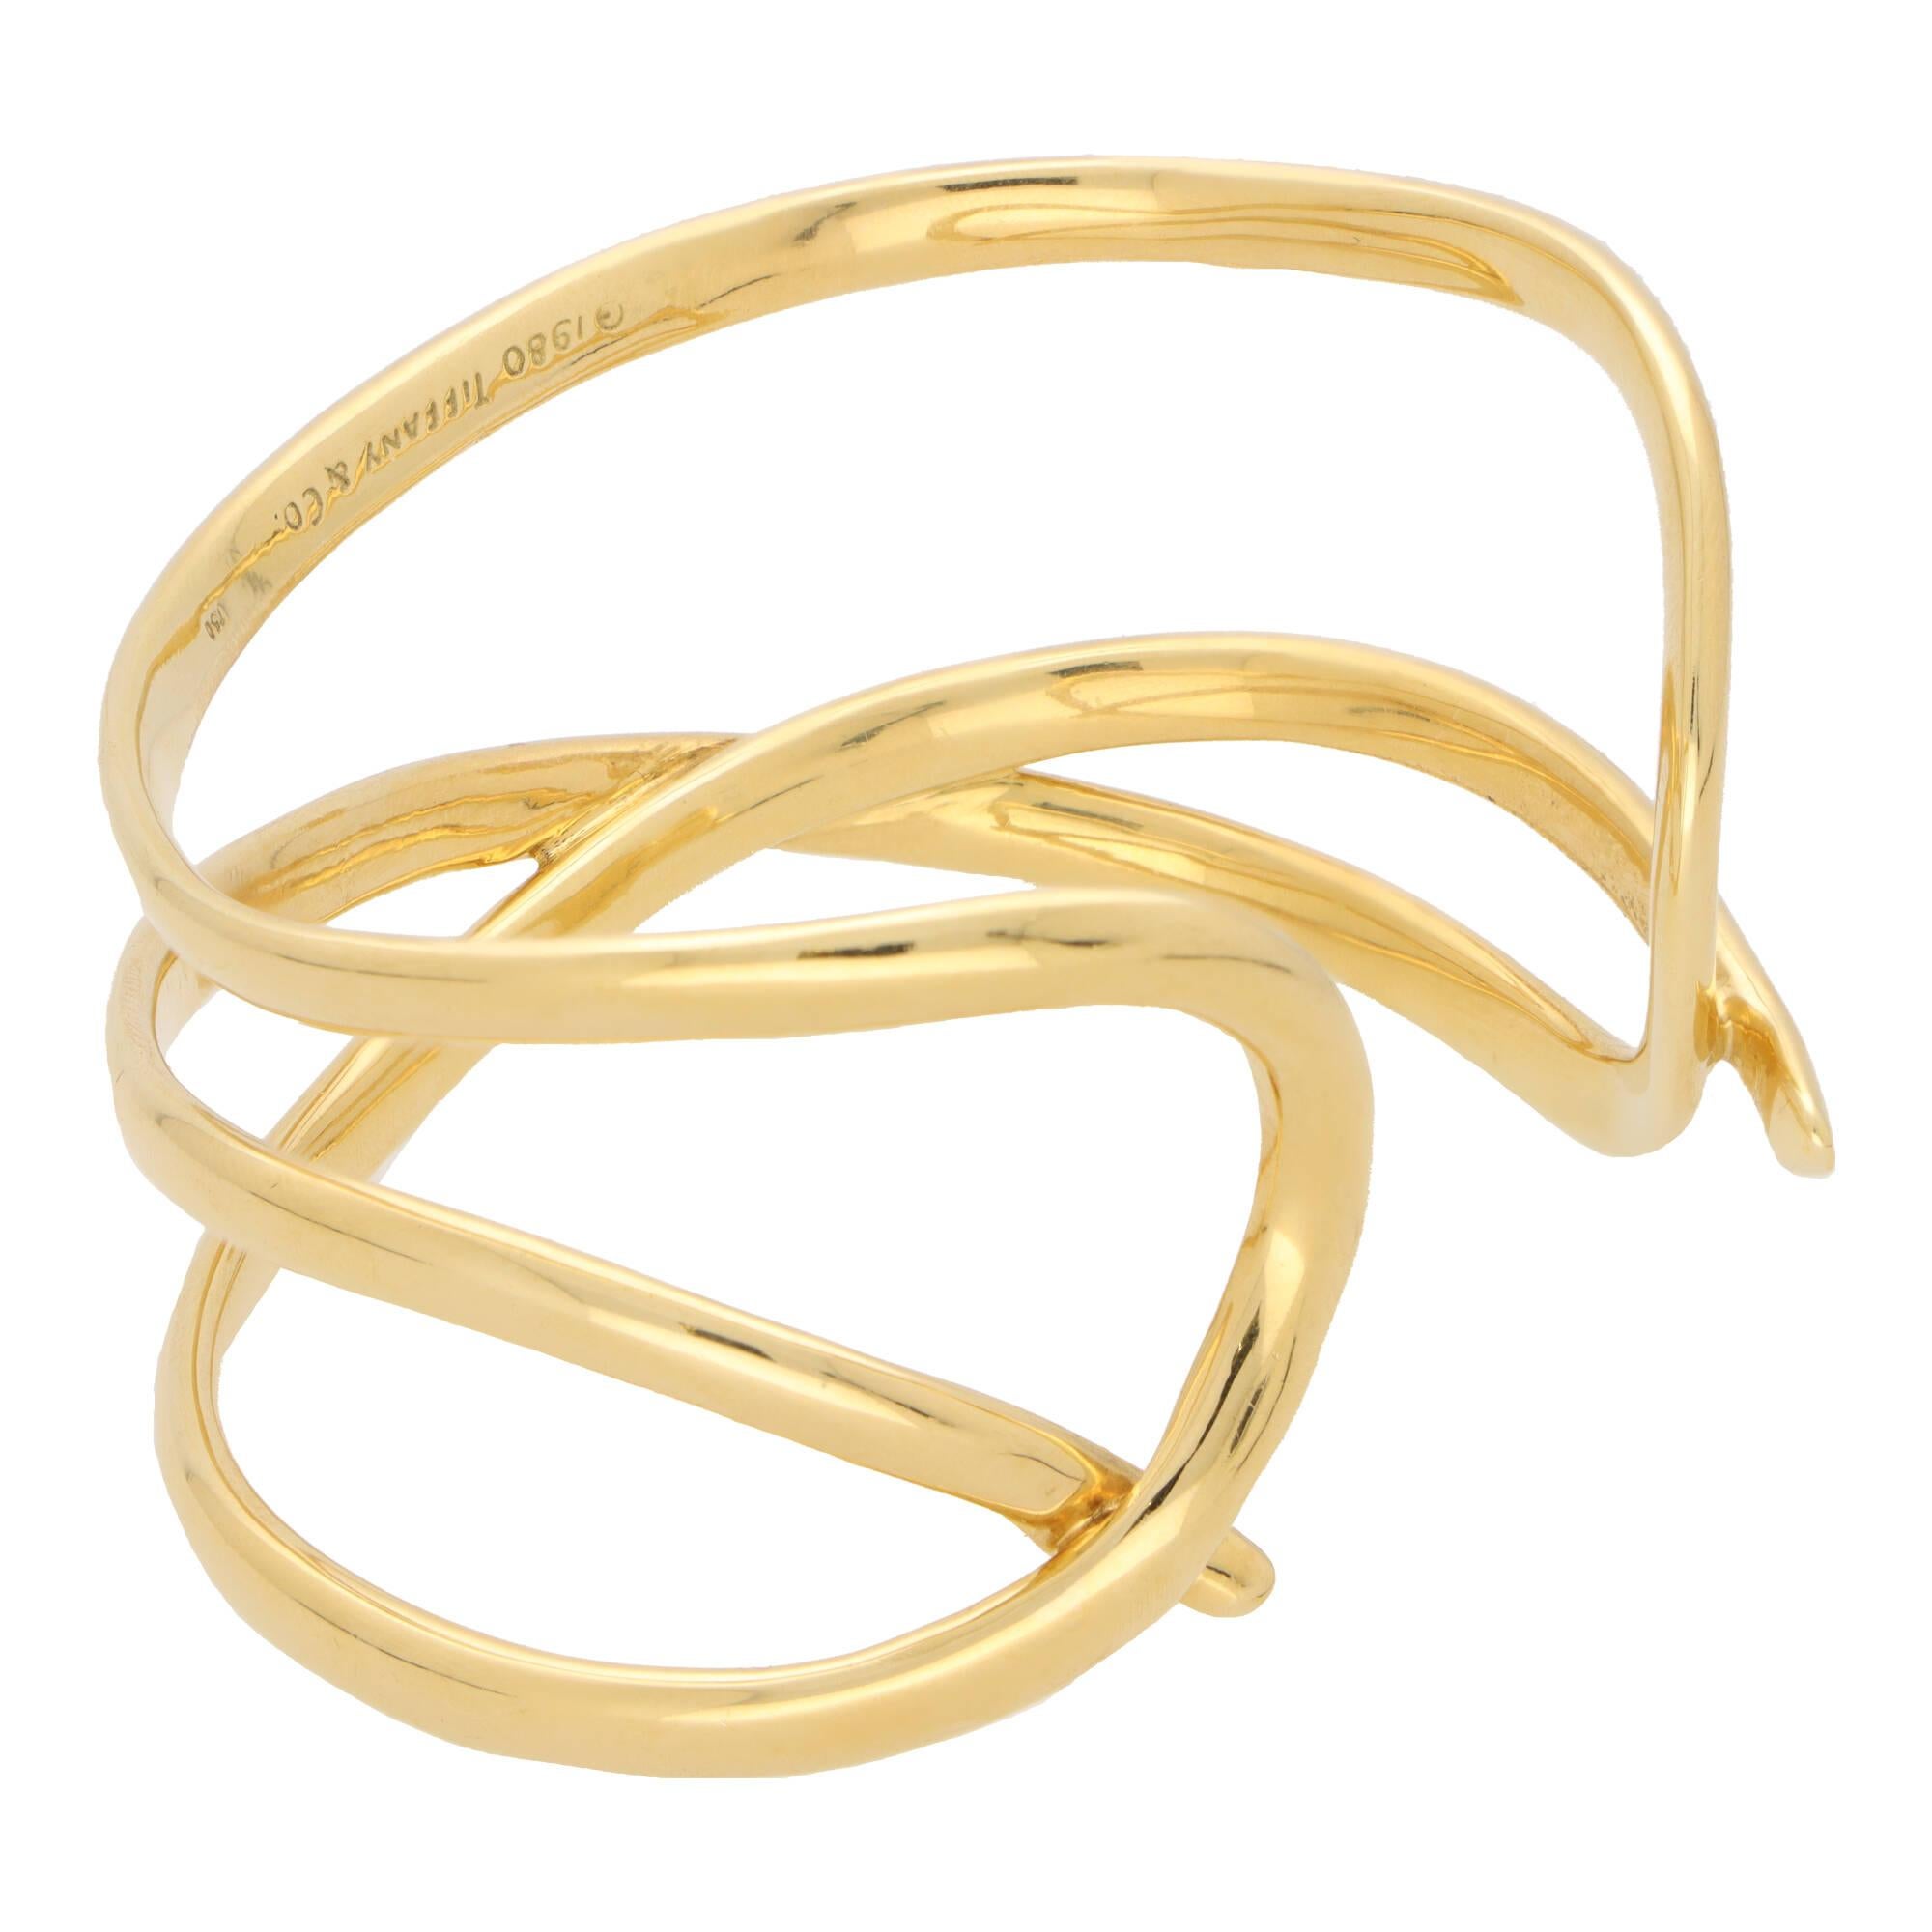 Retro Vintage Tiffany & Co. Twisted Wire Cuff Torque Bangle in 18k Yellow Gold